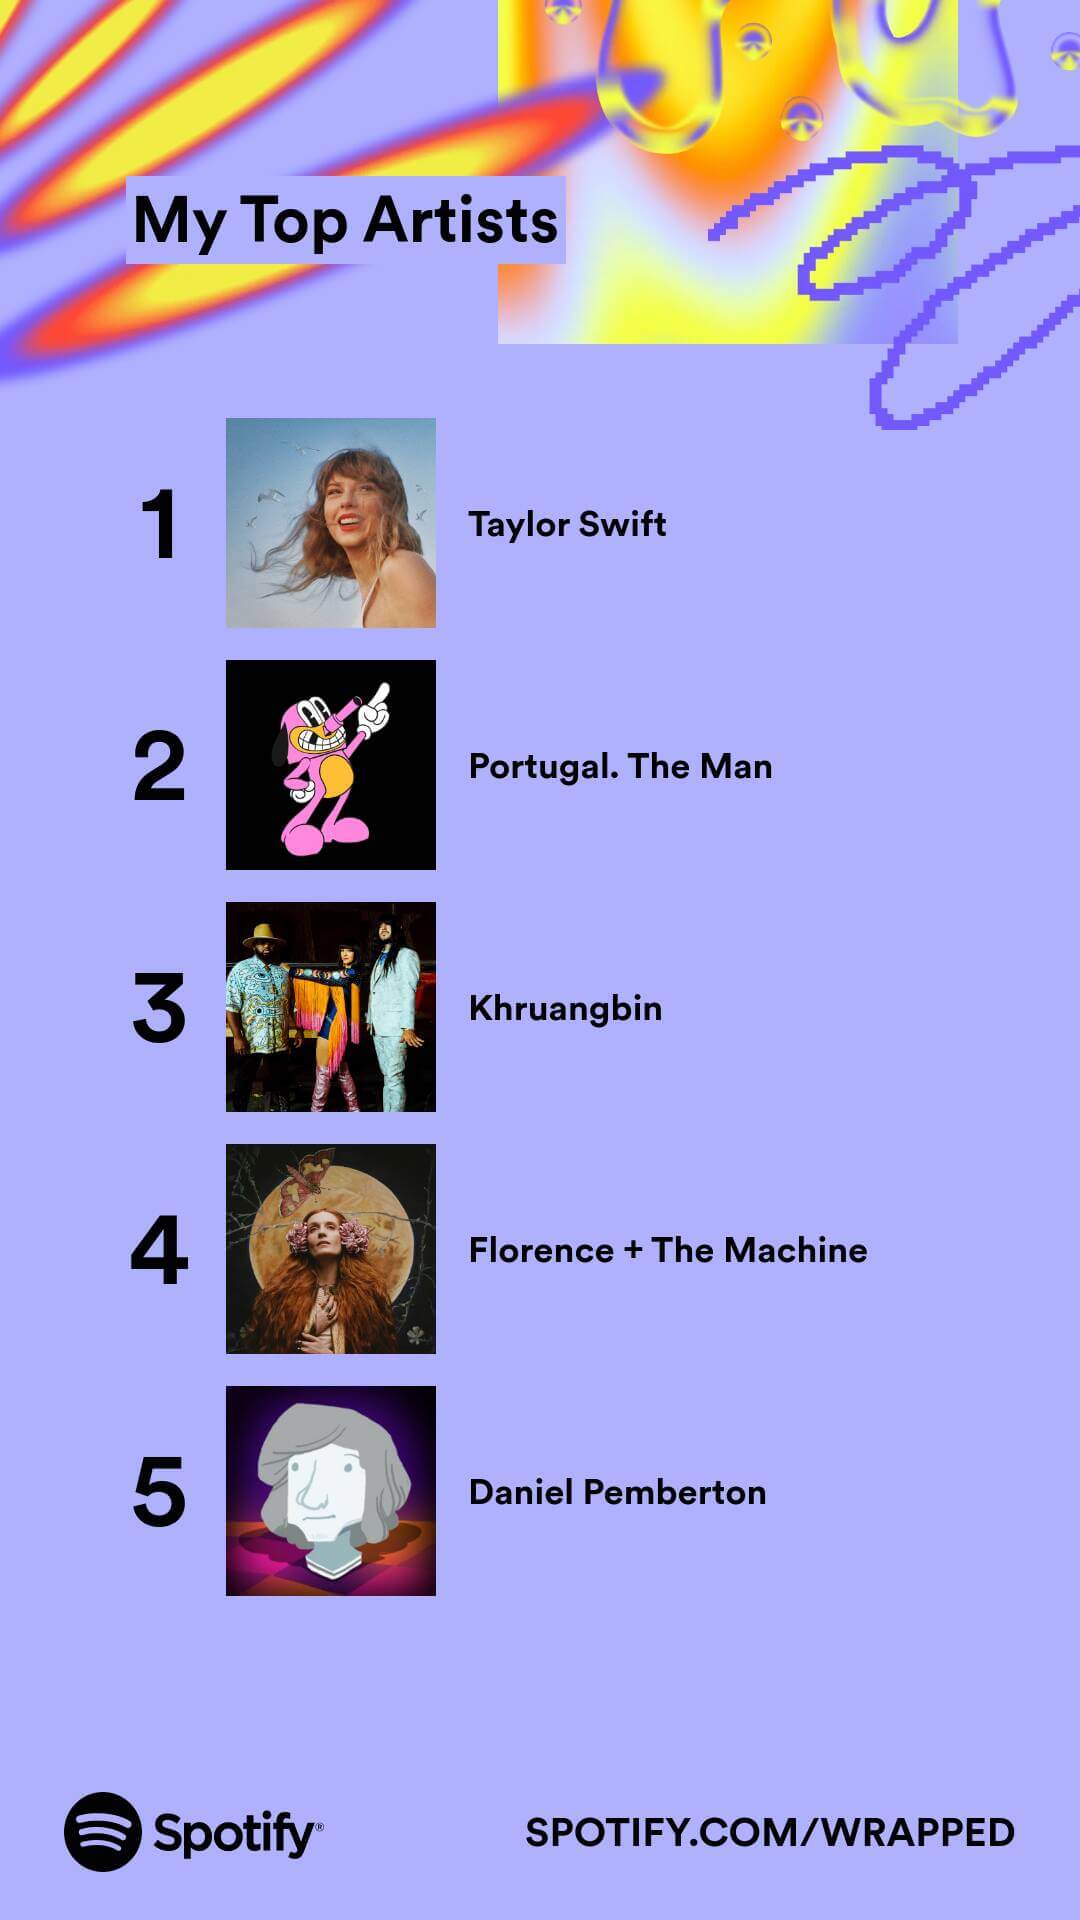 Top artists: Taylor Swift, Portugal. The Man, Khruangbin, Florence and the Machine, and Daniel Pemberton.